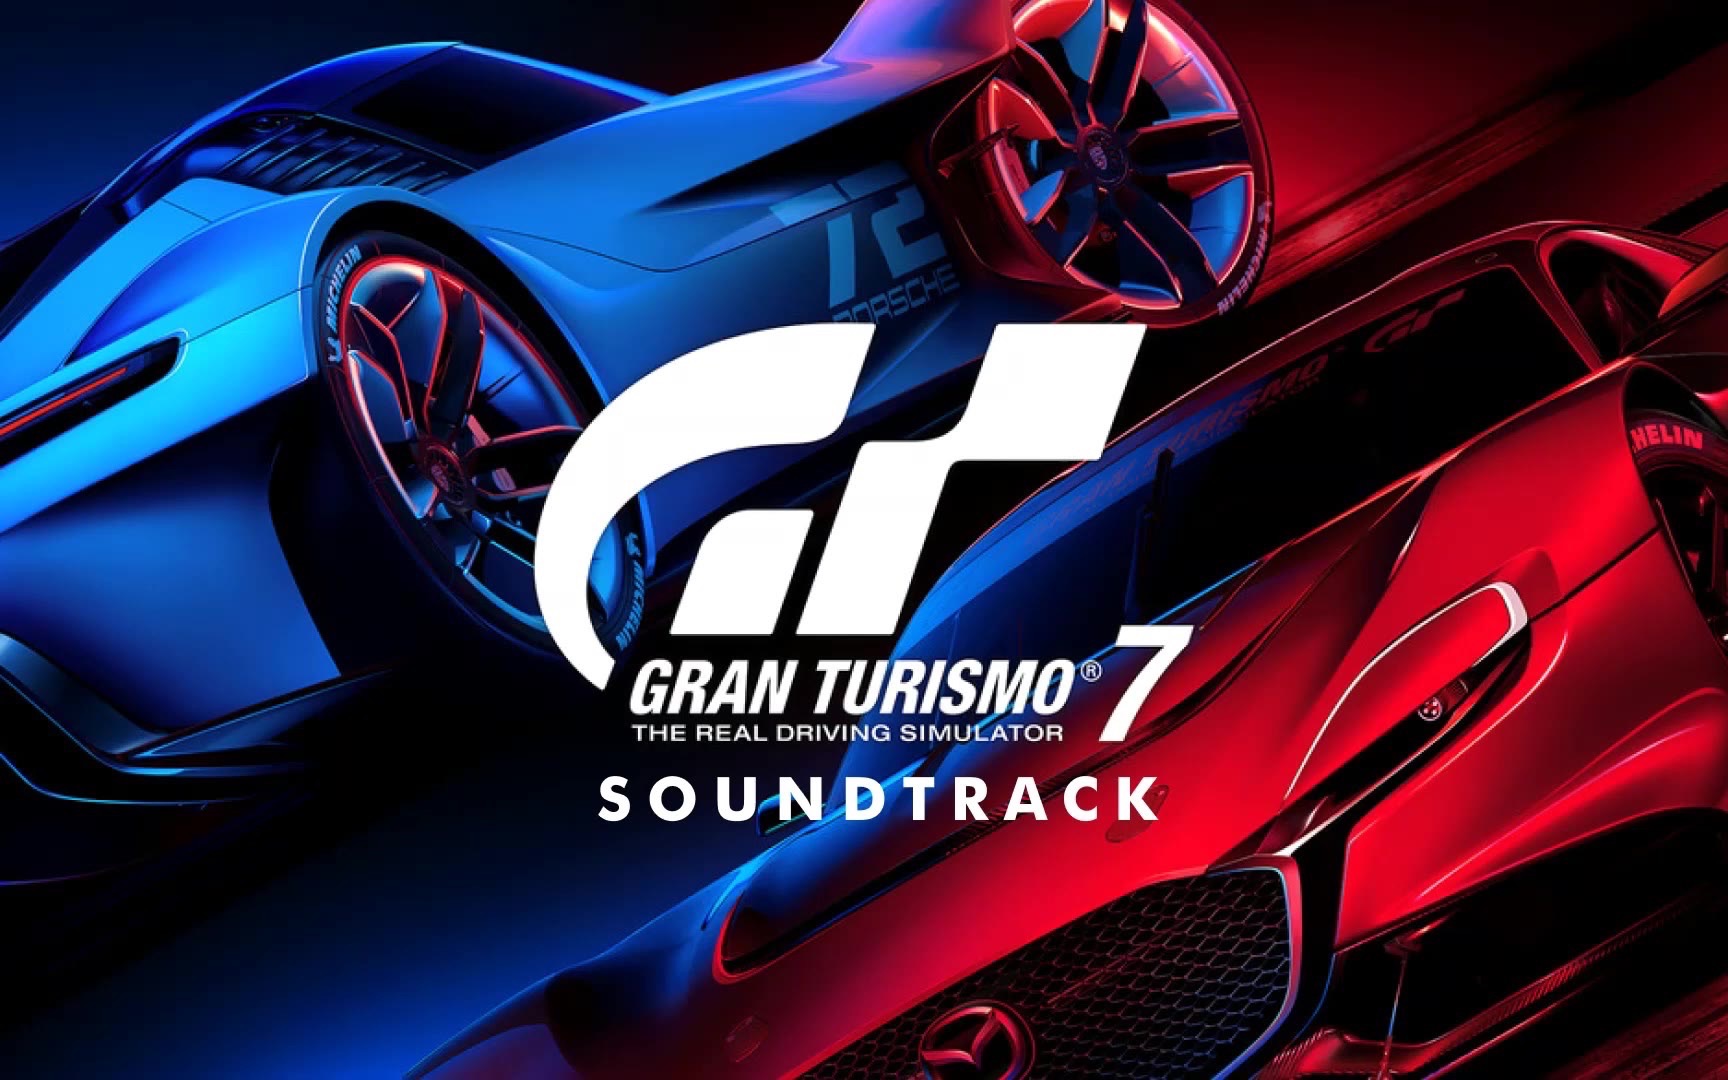 Its All About You Daiki Kasho (Gran Turismo 7 Soundtrack)